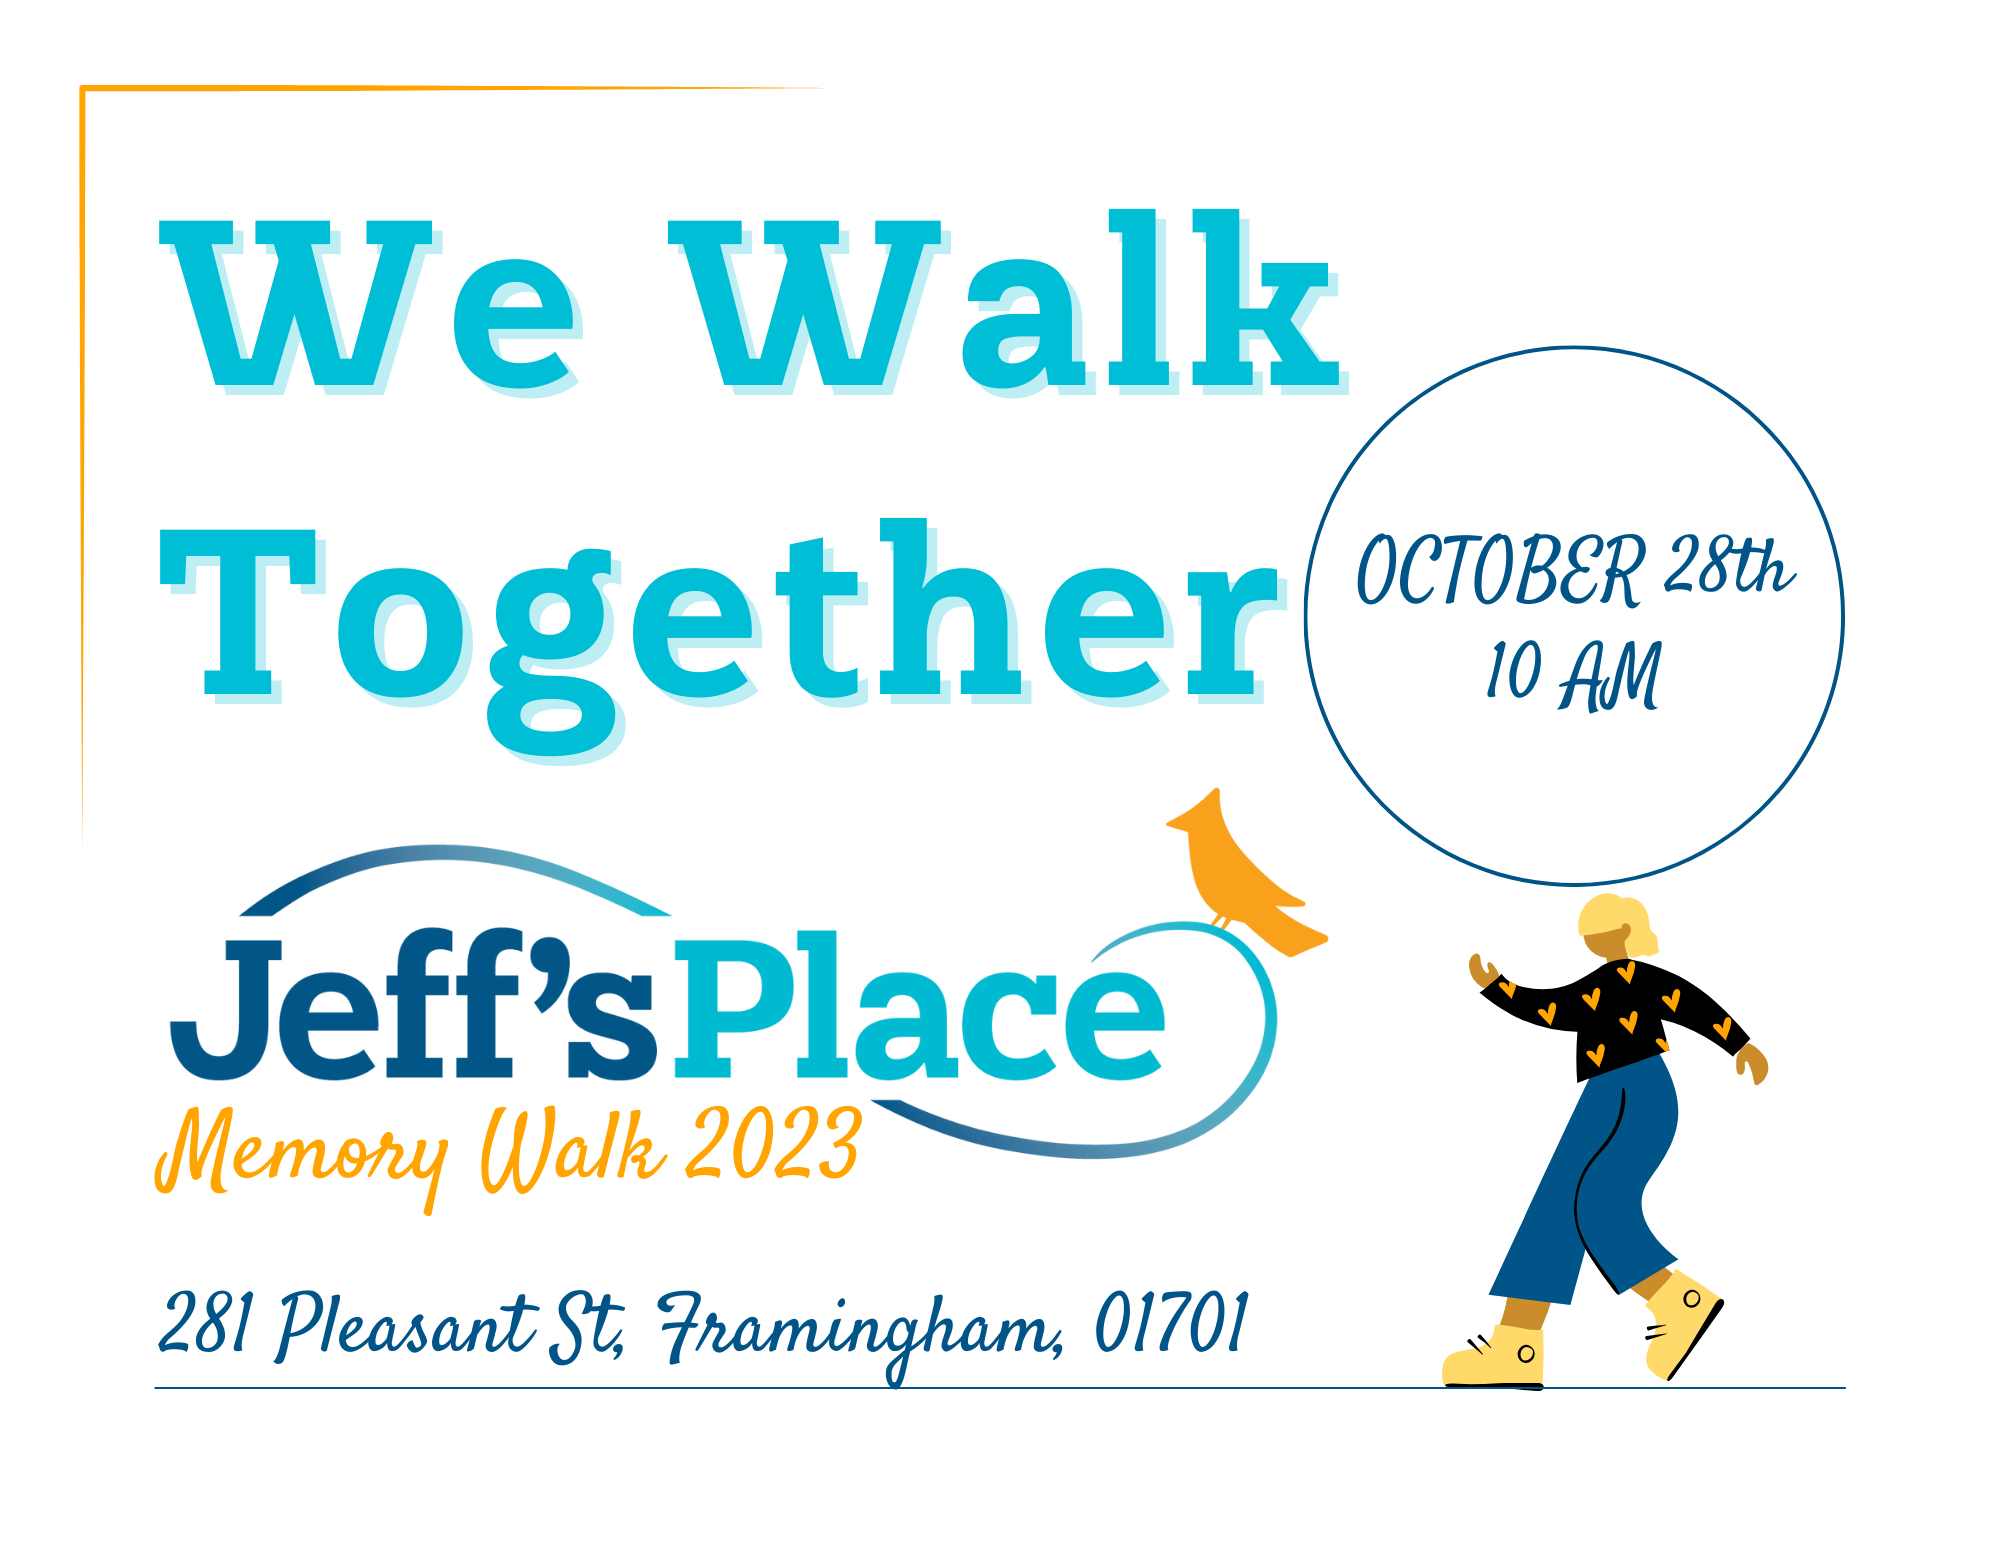 Annual Memory Walk on October 28 at 10 am at Jeff's Place.